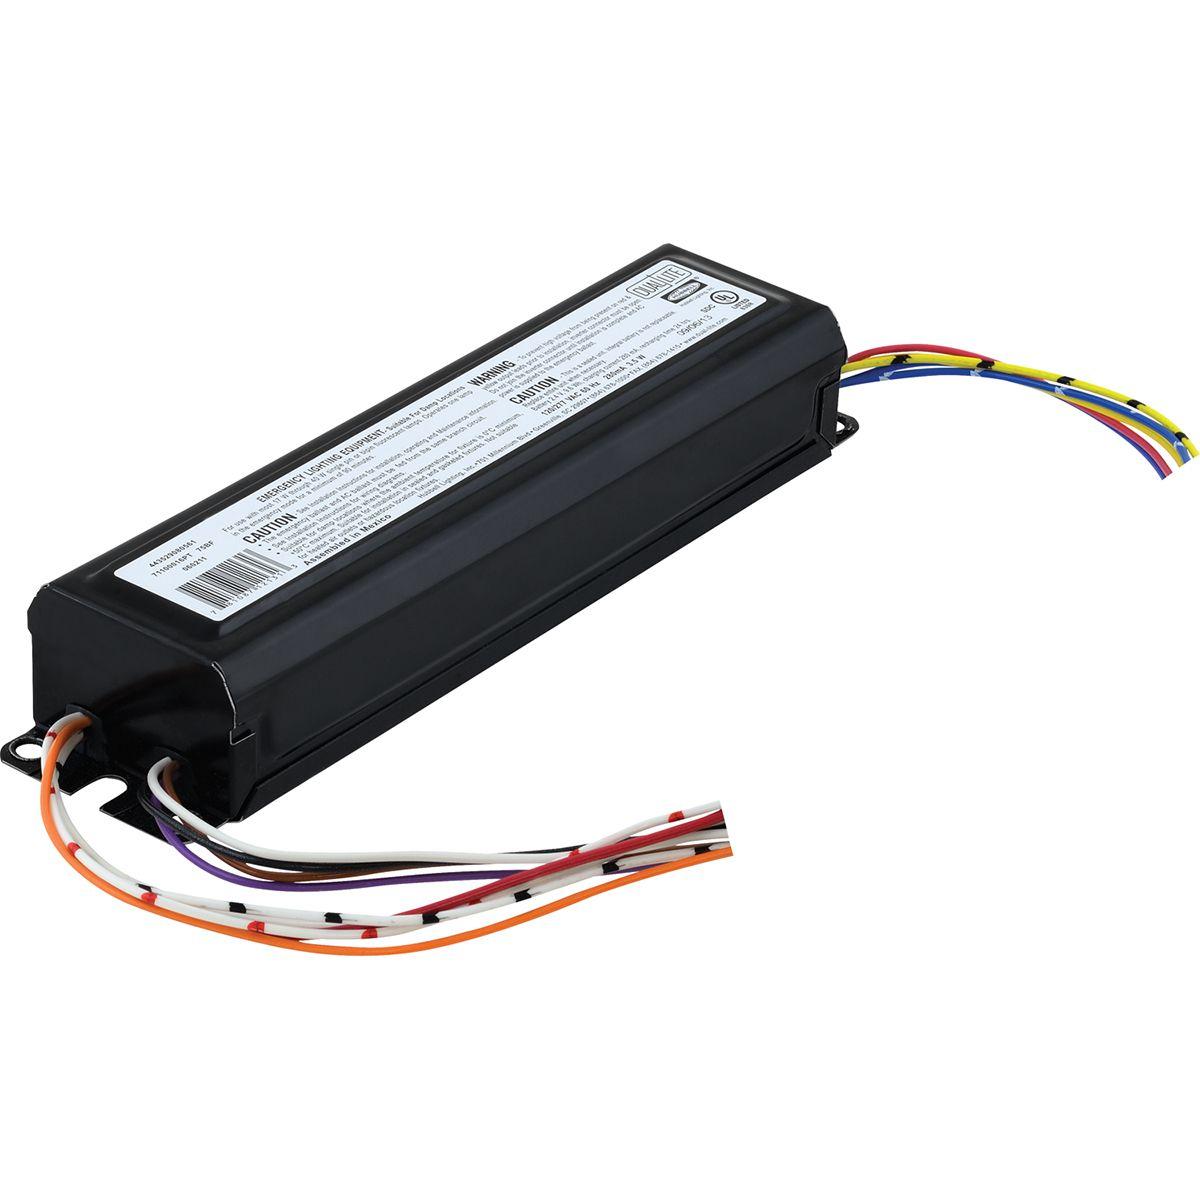 Hubbell UFO-4W Battery Pack - Fluorescent, Lamp Type: Fluorescent, 32 - 40W, Lumen Range: 500-600 lm, N/A, Battery Type: Nickel Cadmium (maintenance free), Compatible with electronic, standard magnetic, energy saving,dimming and end-of-lamp-life AC ballasts, Temperature